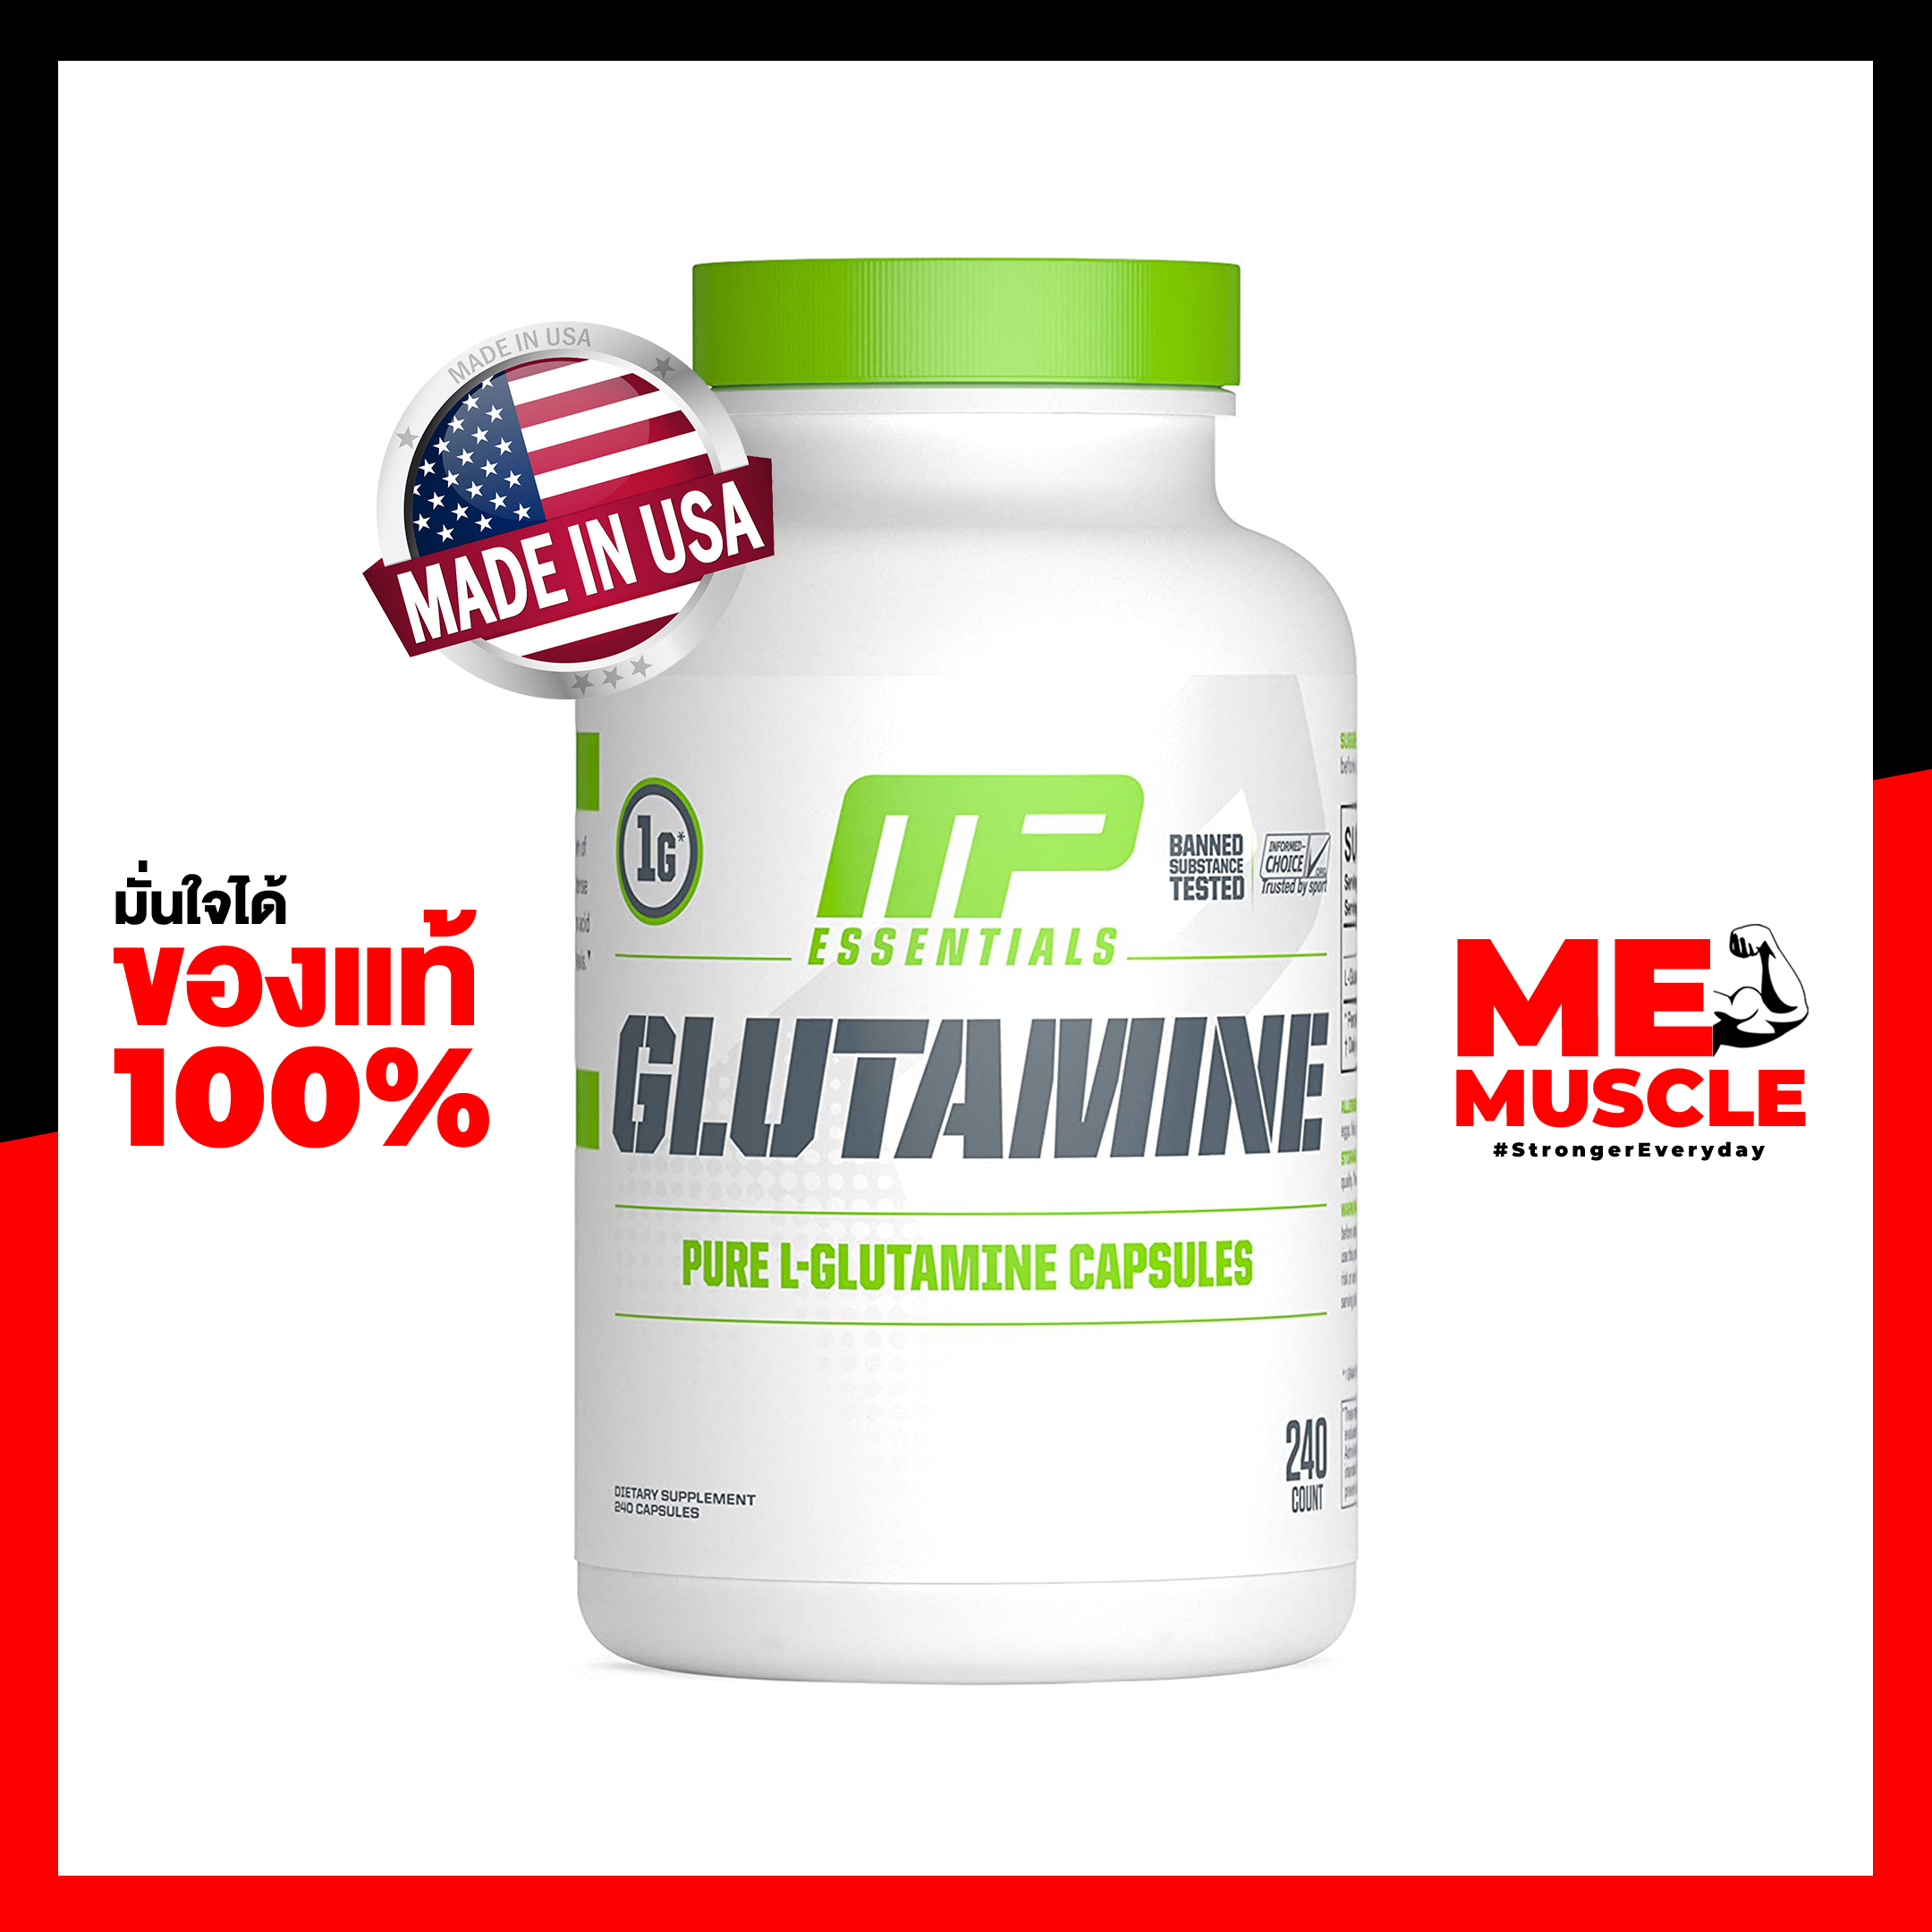 MusclePharm L-Glutamine 240 capsules : Helps Build, Repair and Protect Muscles ช่วยสร้าง/ฟื้นฟูกล้ามเนื้อ